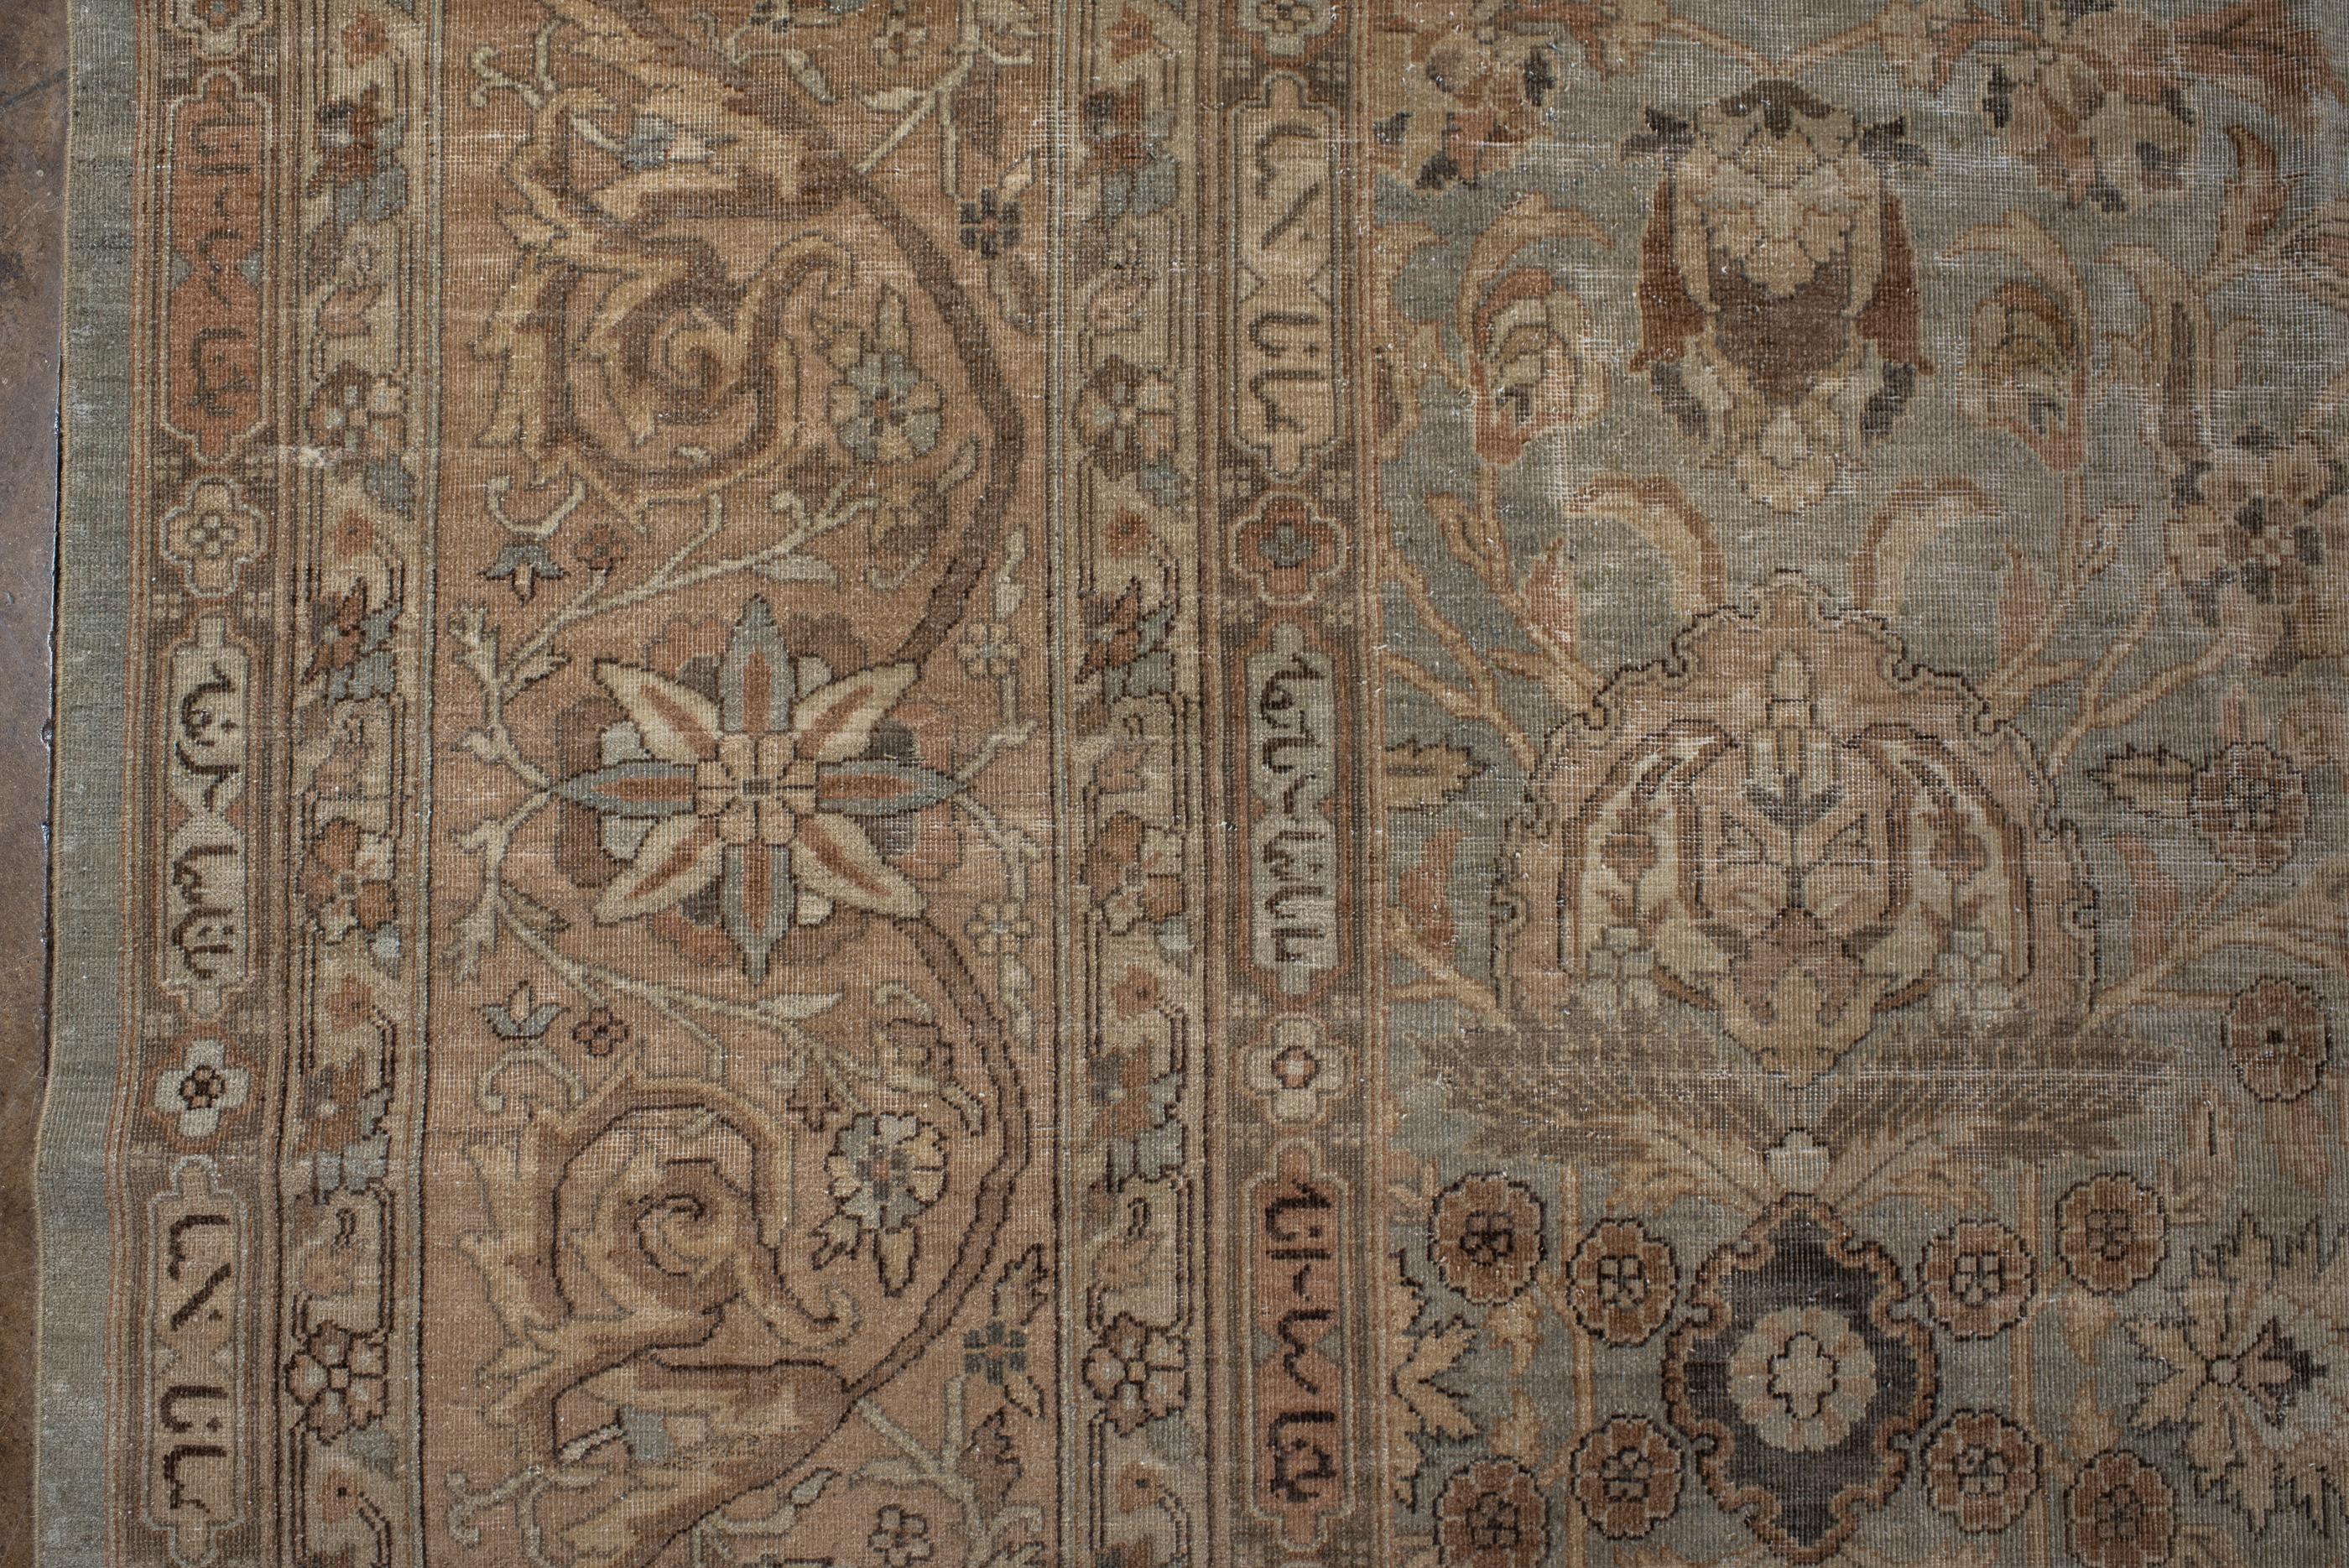 Antique Tabriz Rug with Light Field and All Over Palmette Designs  In Good Condition For Sale In New York, NY